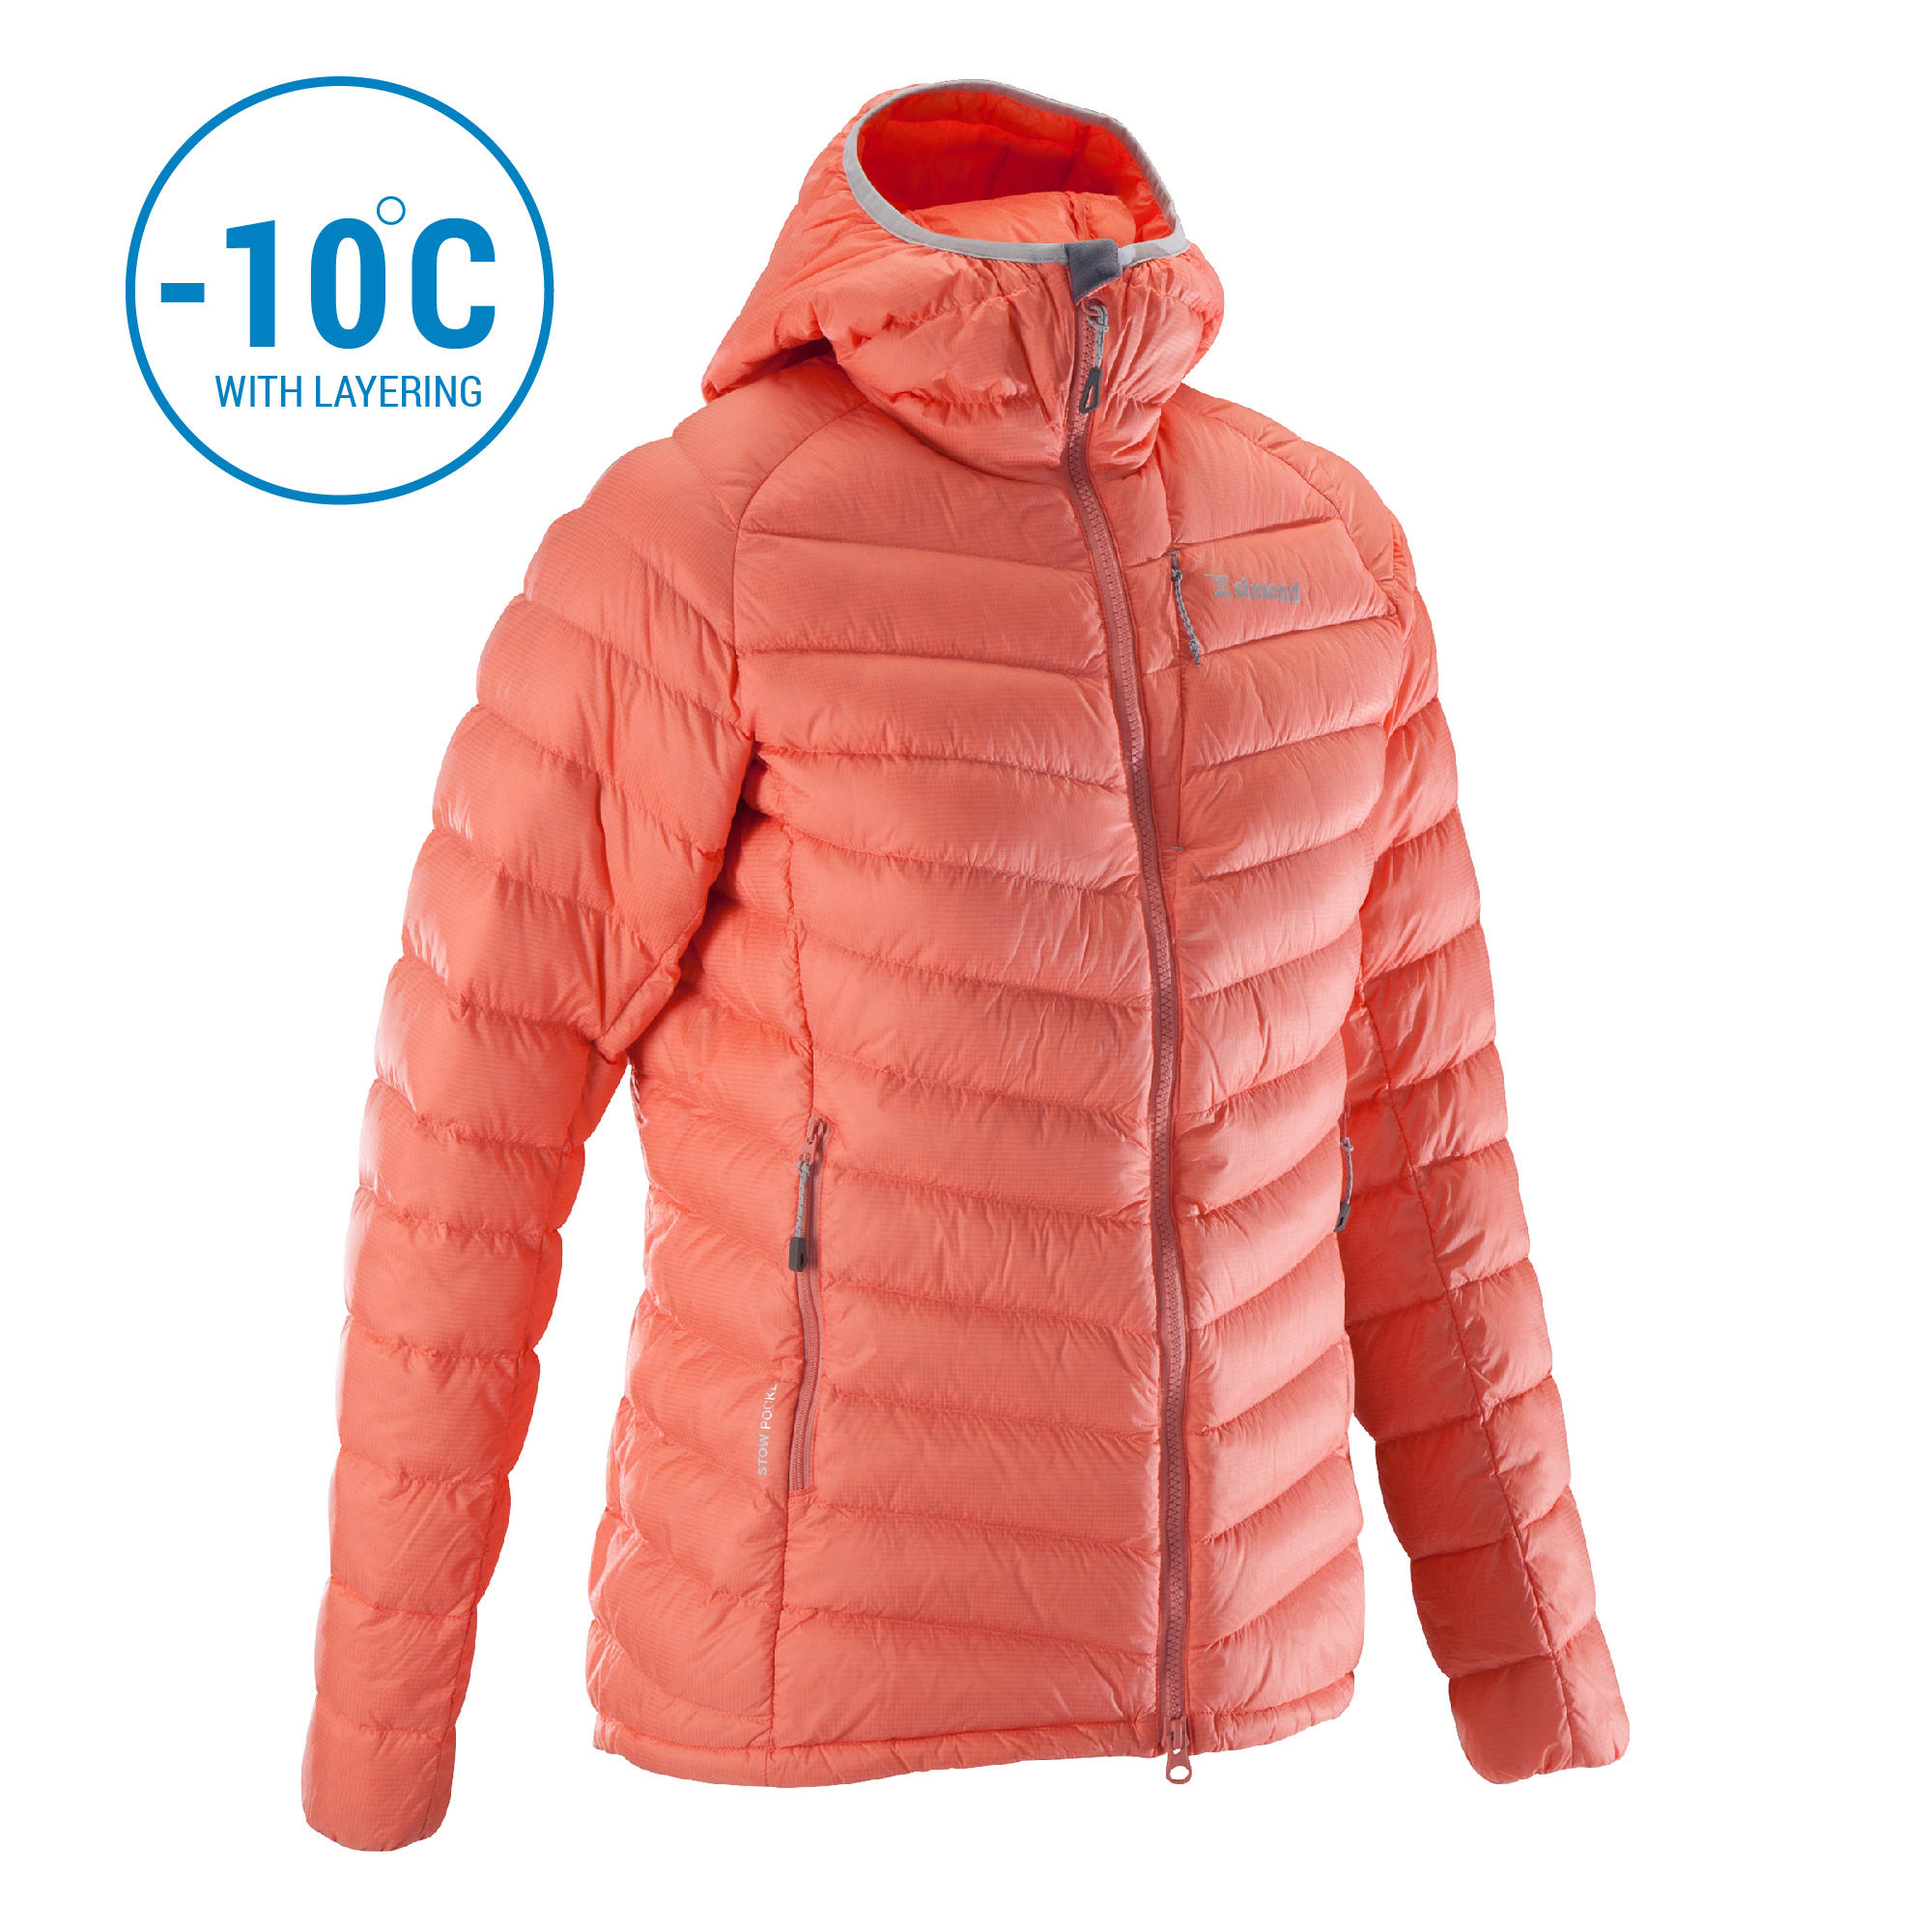 Womens Down Jackets | Buy Down Jackets 